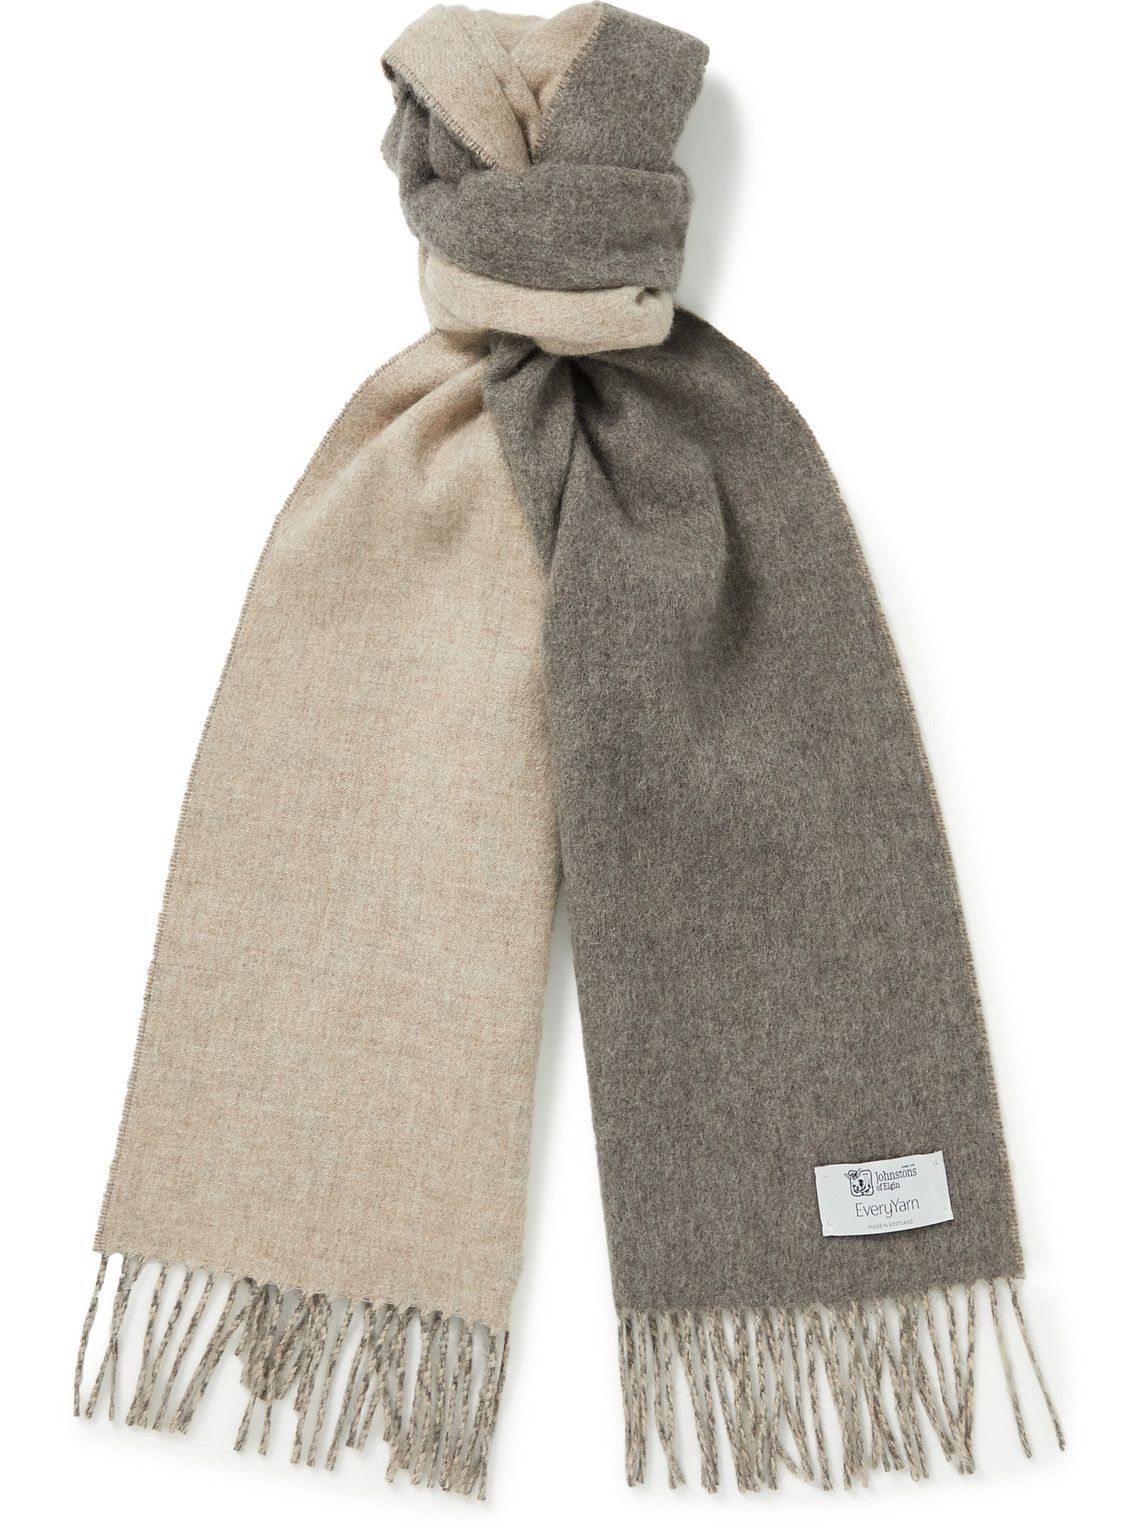 Reversible Pure Cashmere Scarf made in Scotland by Johnstons of Elgin 